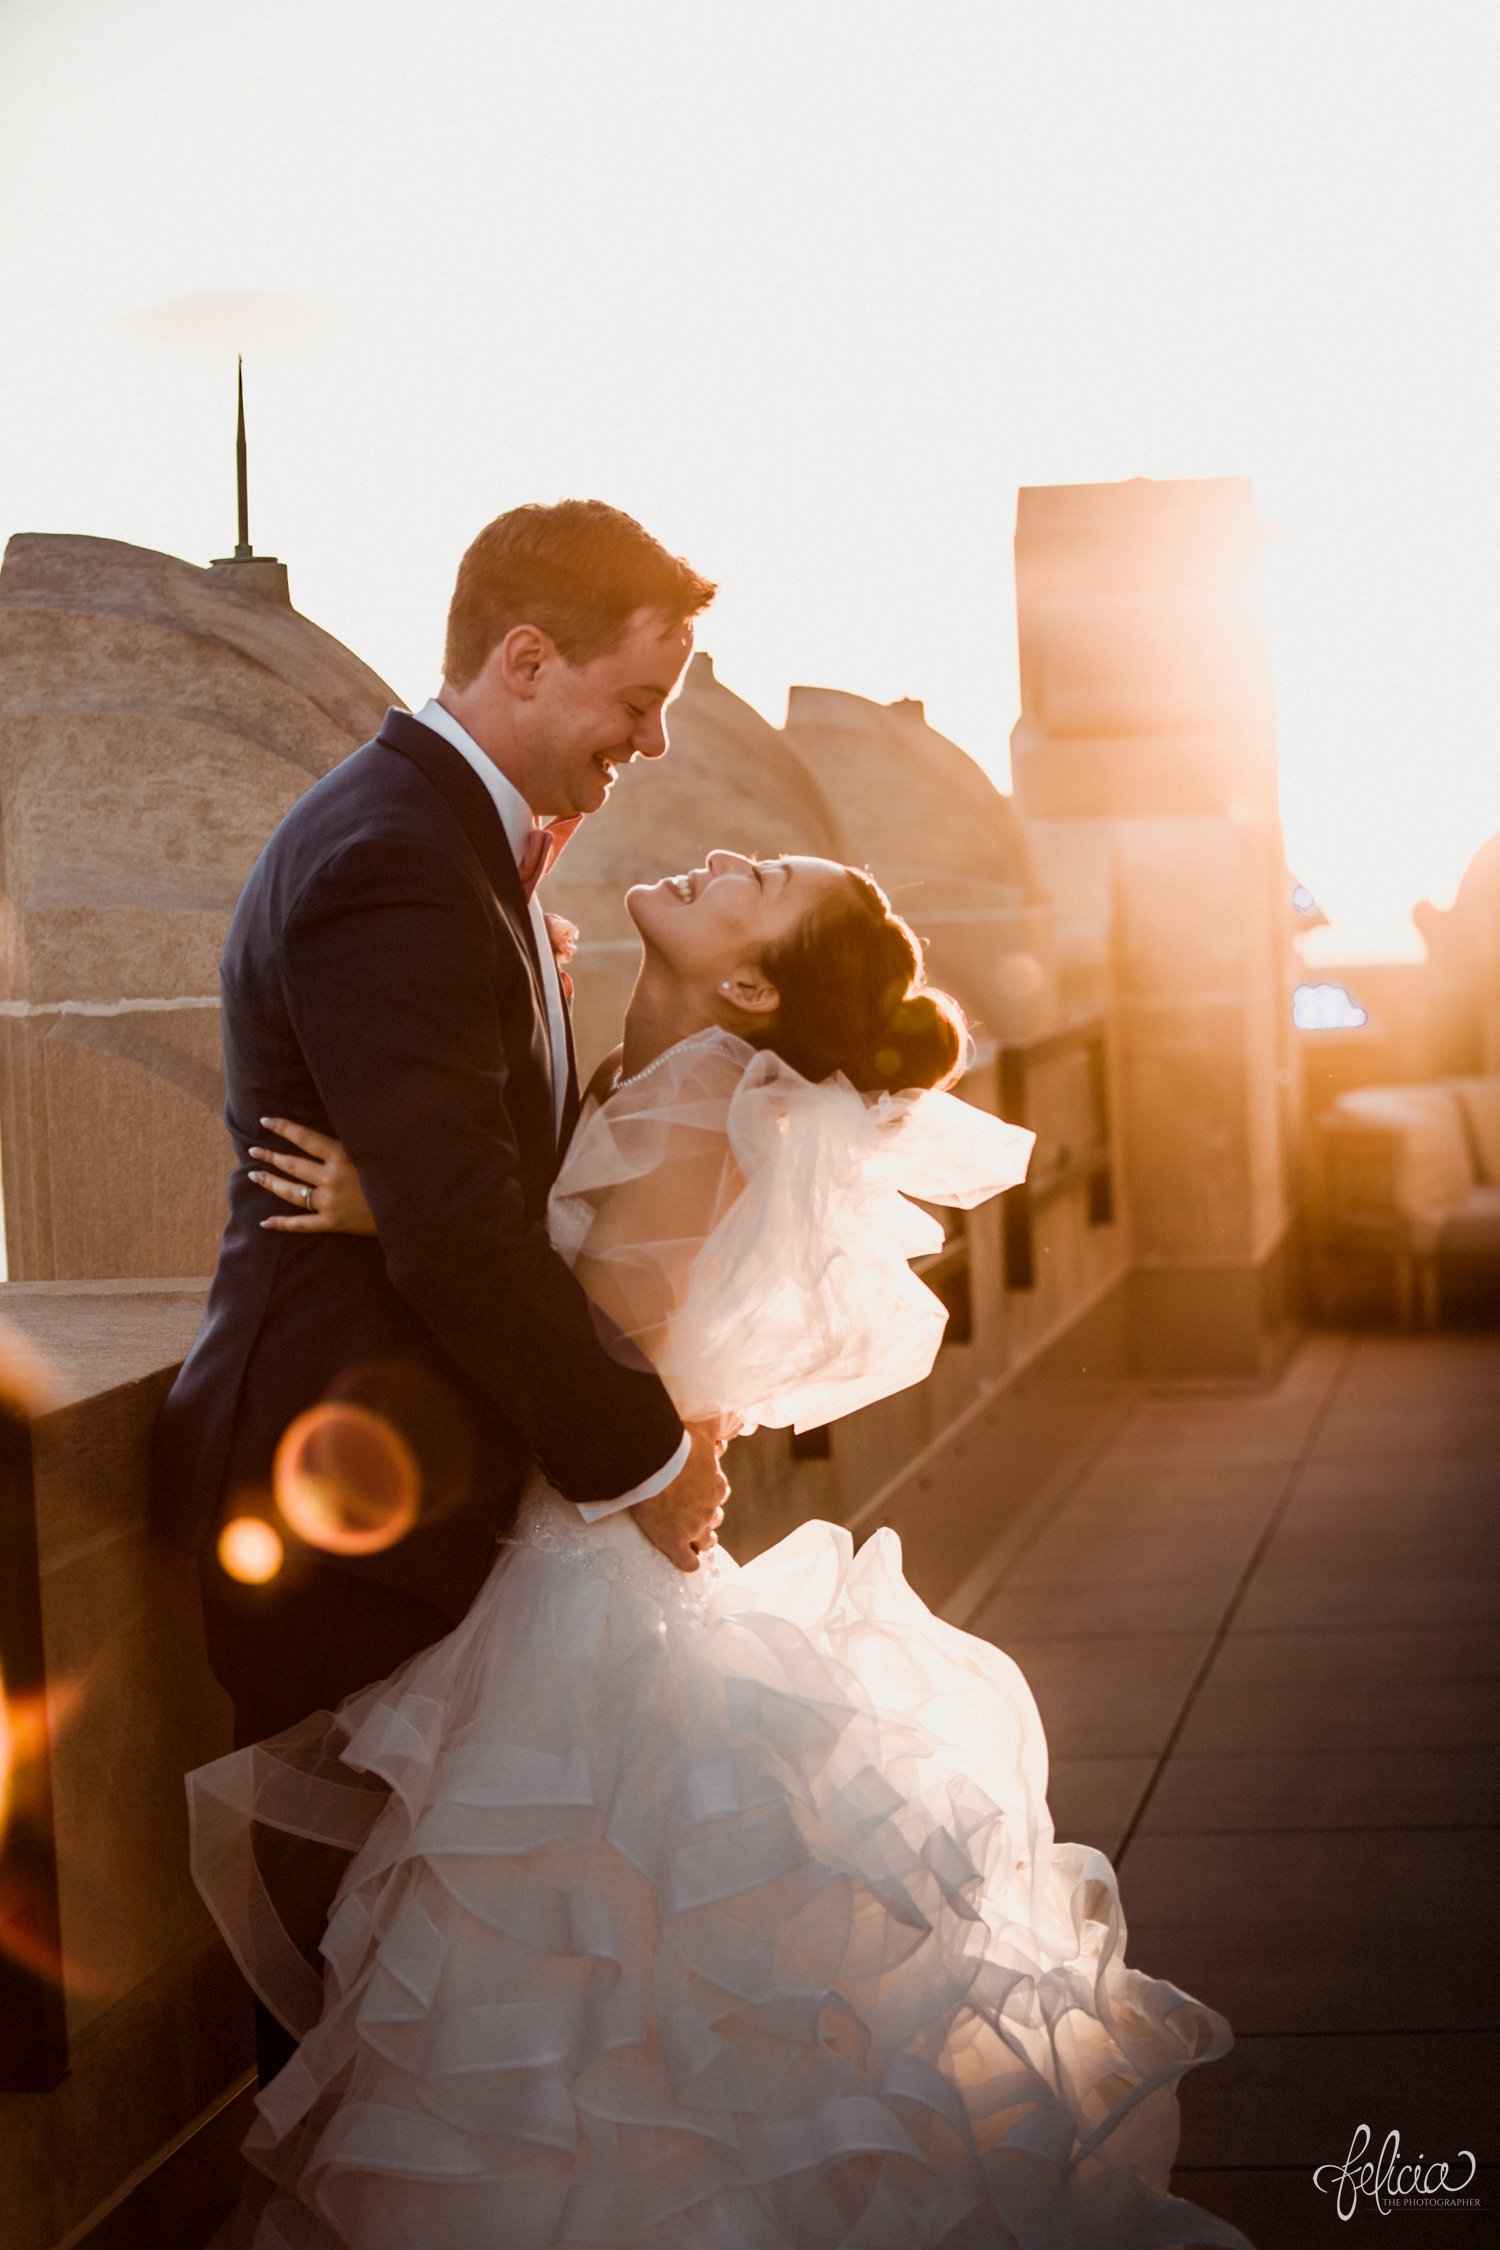 images by feliciathephotographer.com | destination wedding photographer | the grand hall at power and light | kansas city | missouri | downtown | glamorous | multicultural | rooftop | golden hour | sunset | pearls | romantic | couple portrait | city view | 